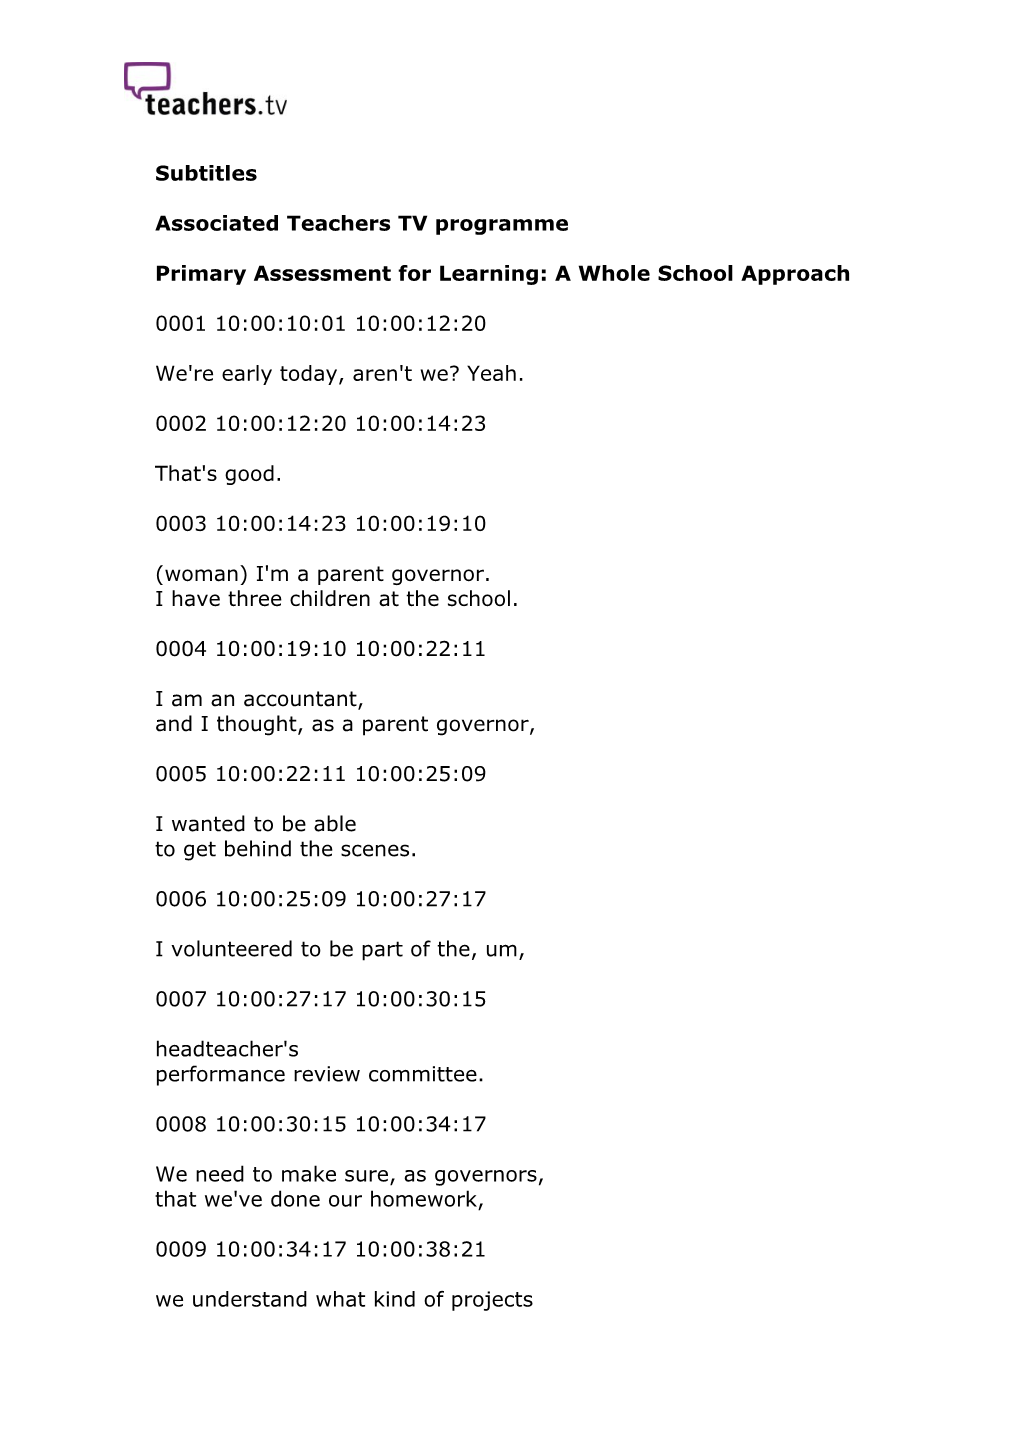 Primary Assessment for Learning: a Whole School Approach